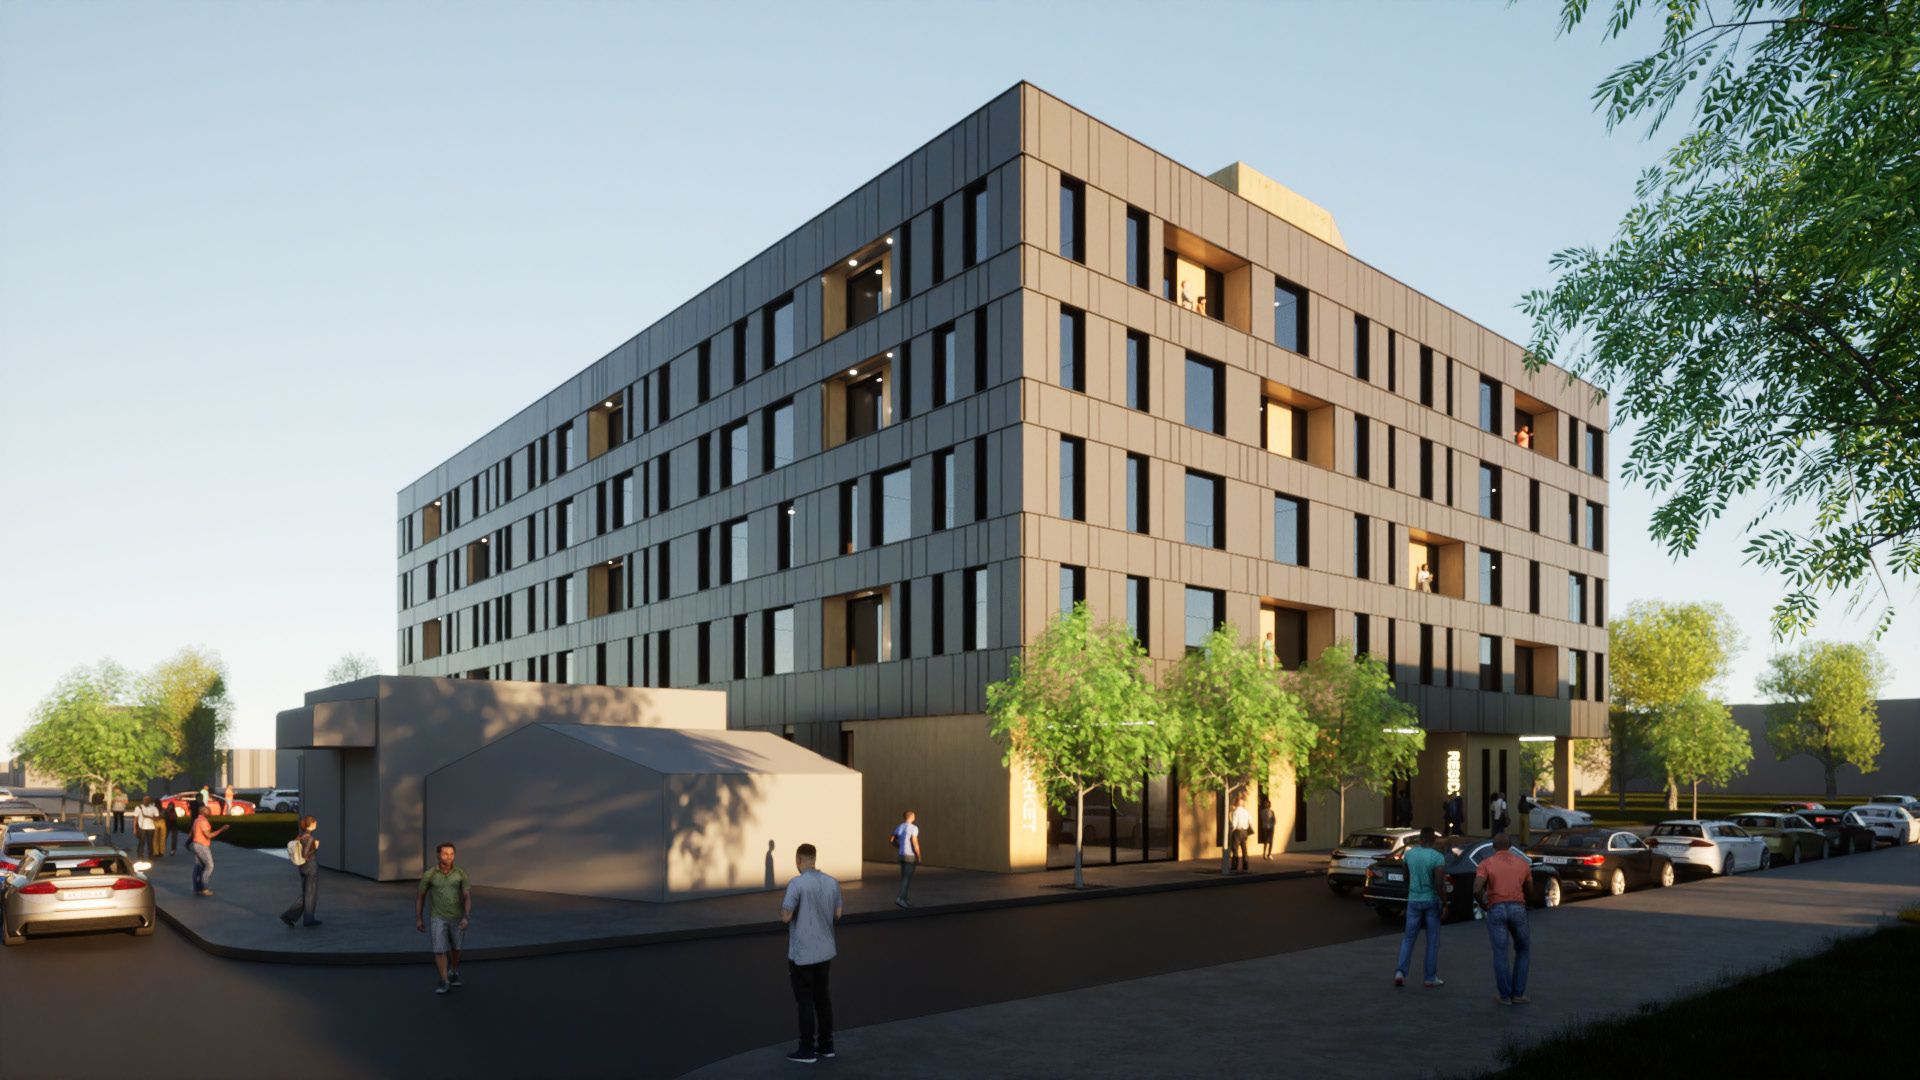 2024-28 North 22nd Street. Building rendering. Credit: Oombra Architects via the Civic Design Review